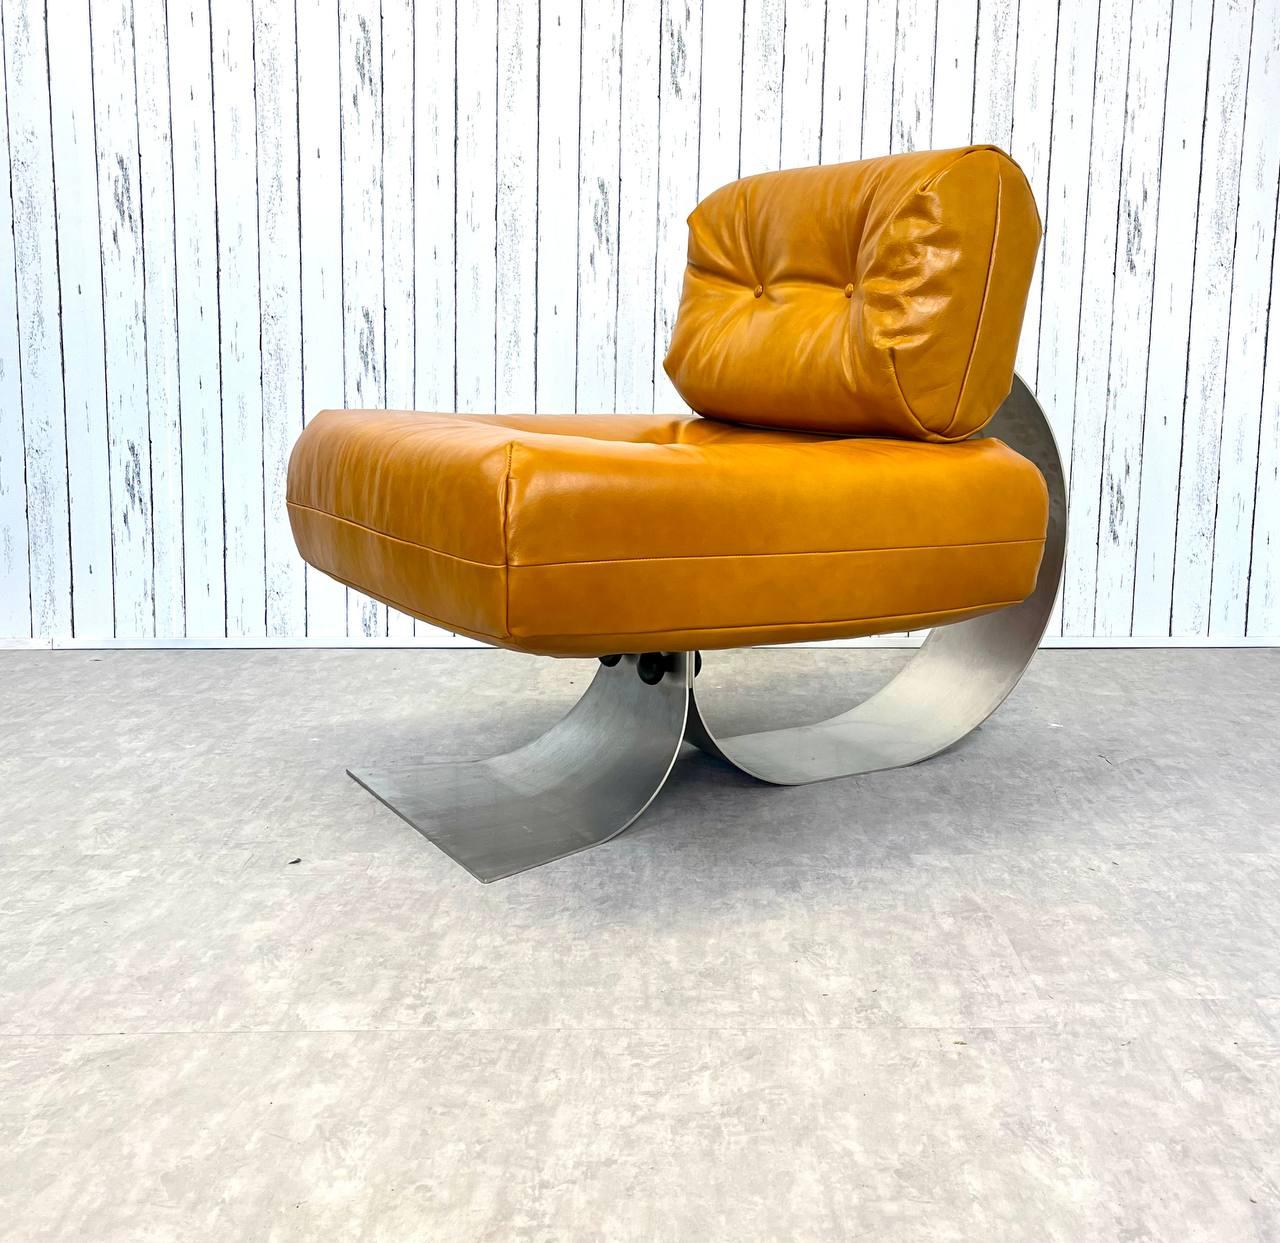 CONTACT FOR ACTUAL SHIPPING COSTS.

Fantastic and iconic 'Alta' lounge chair with ottoman designed by Brazilian architect Oscar Niemeyer and manufactured by Mobilier International in France. Made of steel with mustard-colored leather upholstery,